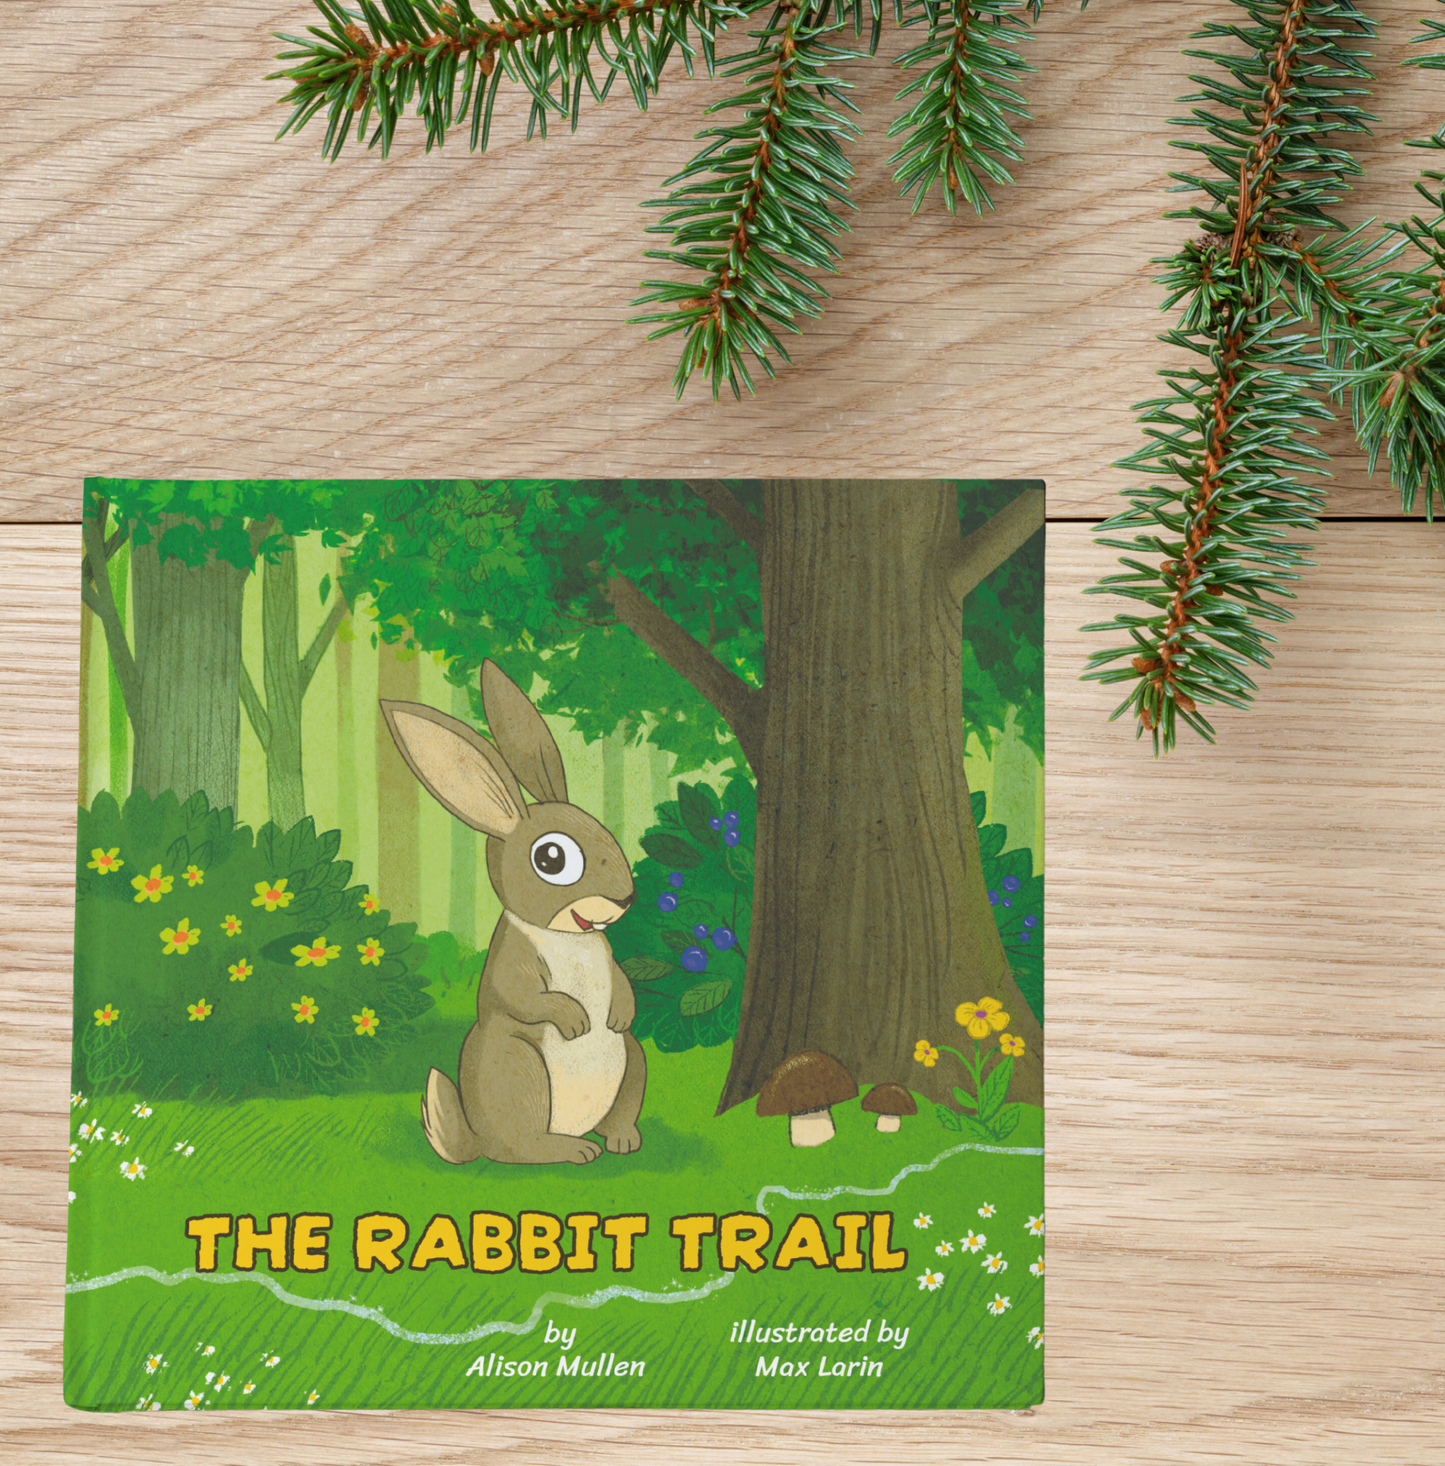 The Rabbit Trail - A children's picture book about an adventure of a curious rabbit